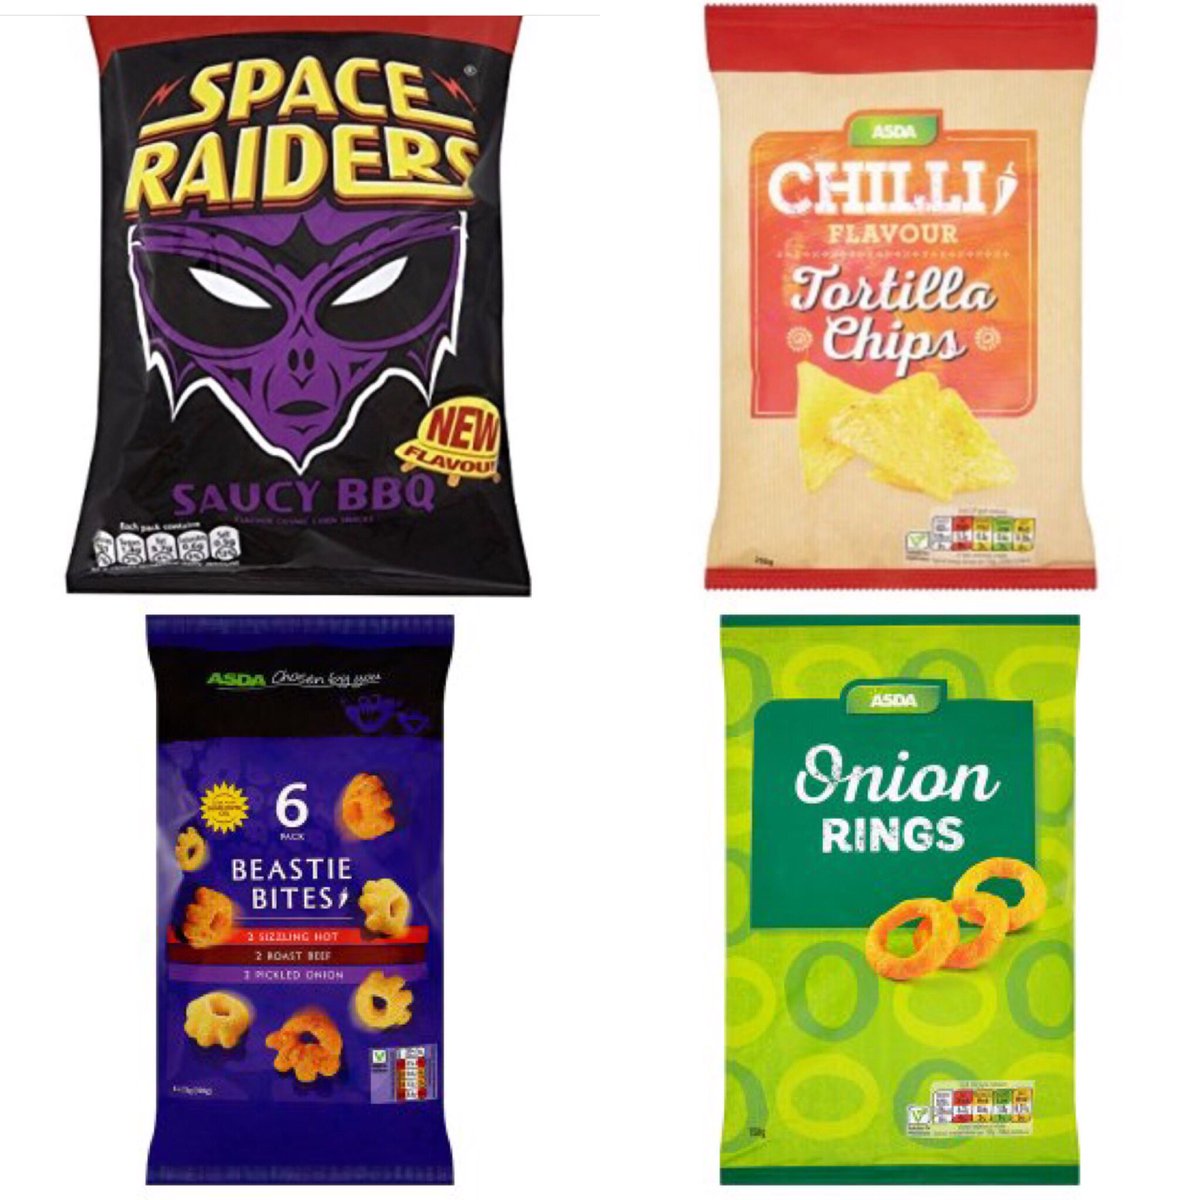 More vegan crisps and stuff! It's really worth checking anything you might want cause so many things are vegan now 